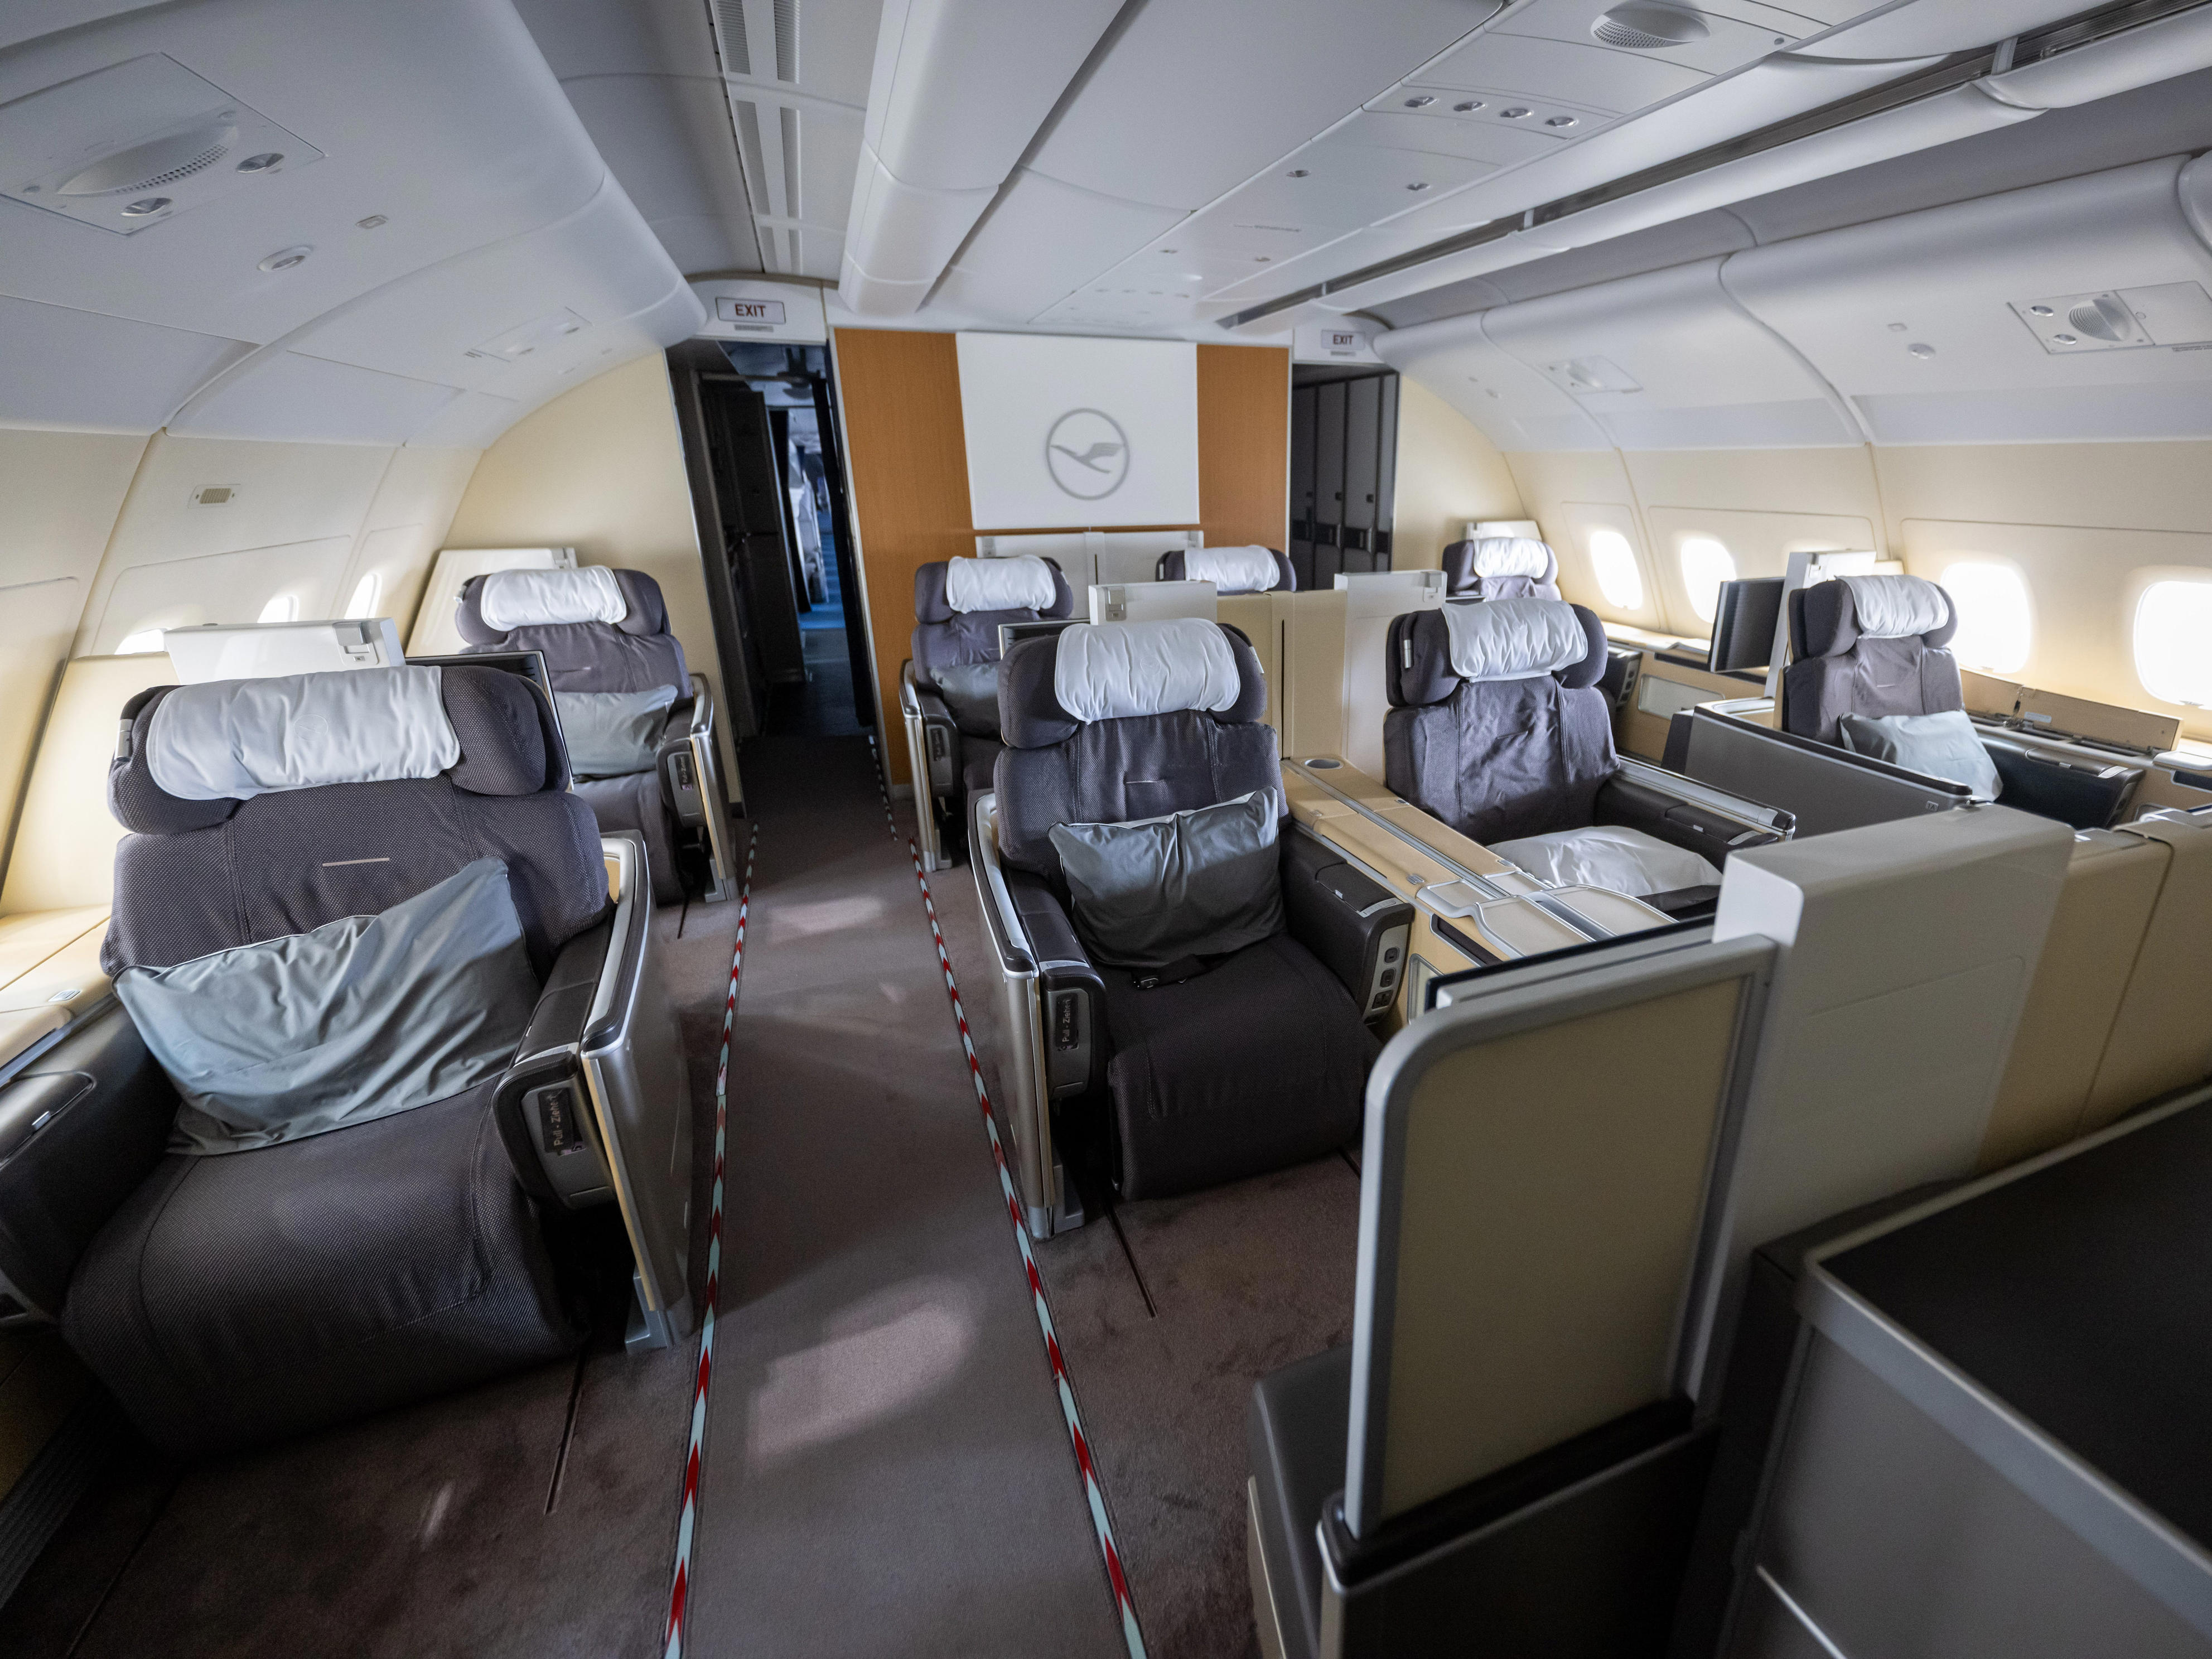 <p>Lufthansa has postponed the deployment of Allegris first class to the fourth quarter of 2024.</p><p>According to the German media outlet <a href="https://travel-dealz.com/news/lufthansa-allegris-seat-map/">Travel-Dealz</a>, Lufthansa told reporters in December that it would install extra economy seats in lieu of first class on the initial A350s jets flying with Allegris while it waits on the cabin supplier.</p>